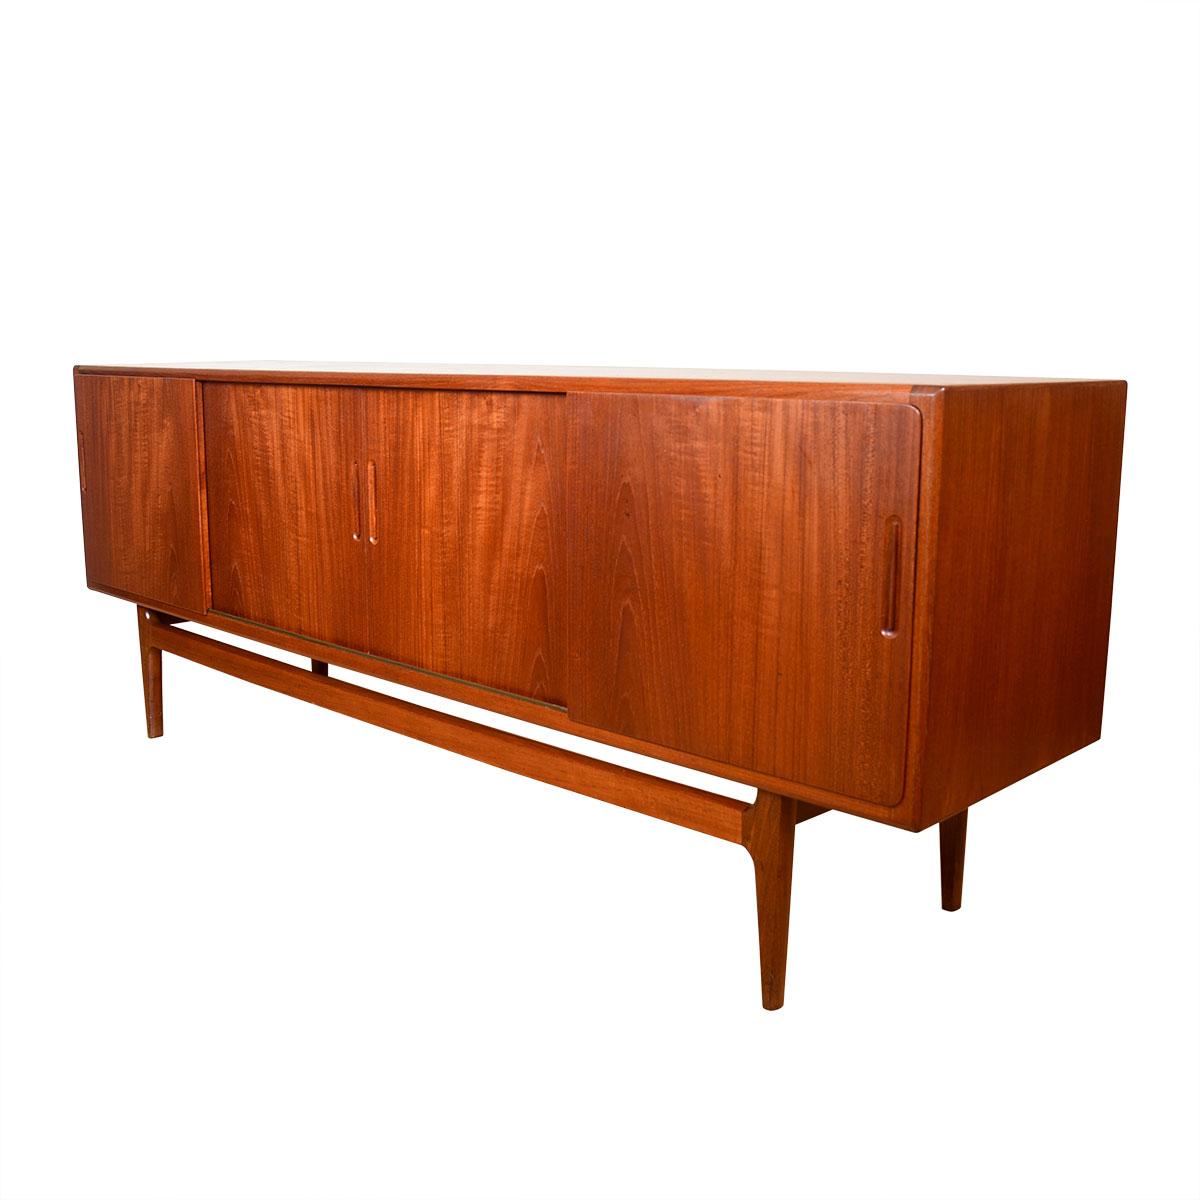 Danish Modern Teak Sideboard with 4 Sliding Doors, 1950s

Additional Information:
Material: Teak
Featured at DC:
Gracious & refined, this serene Danish sideboard features 4 sliding doors across its front.
Inside a column of shallow drawers is